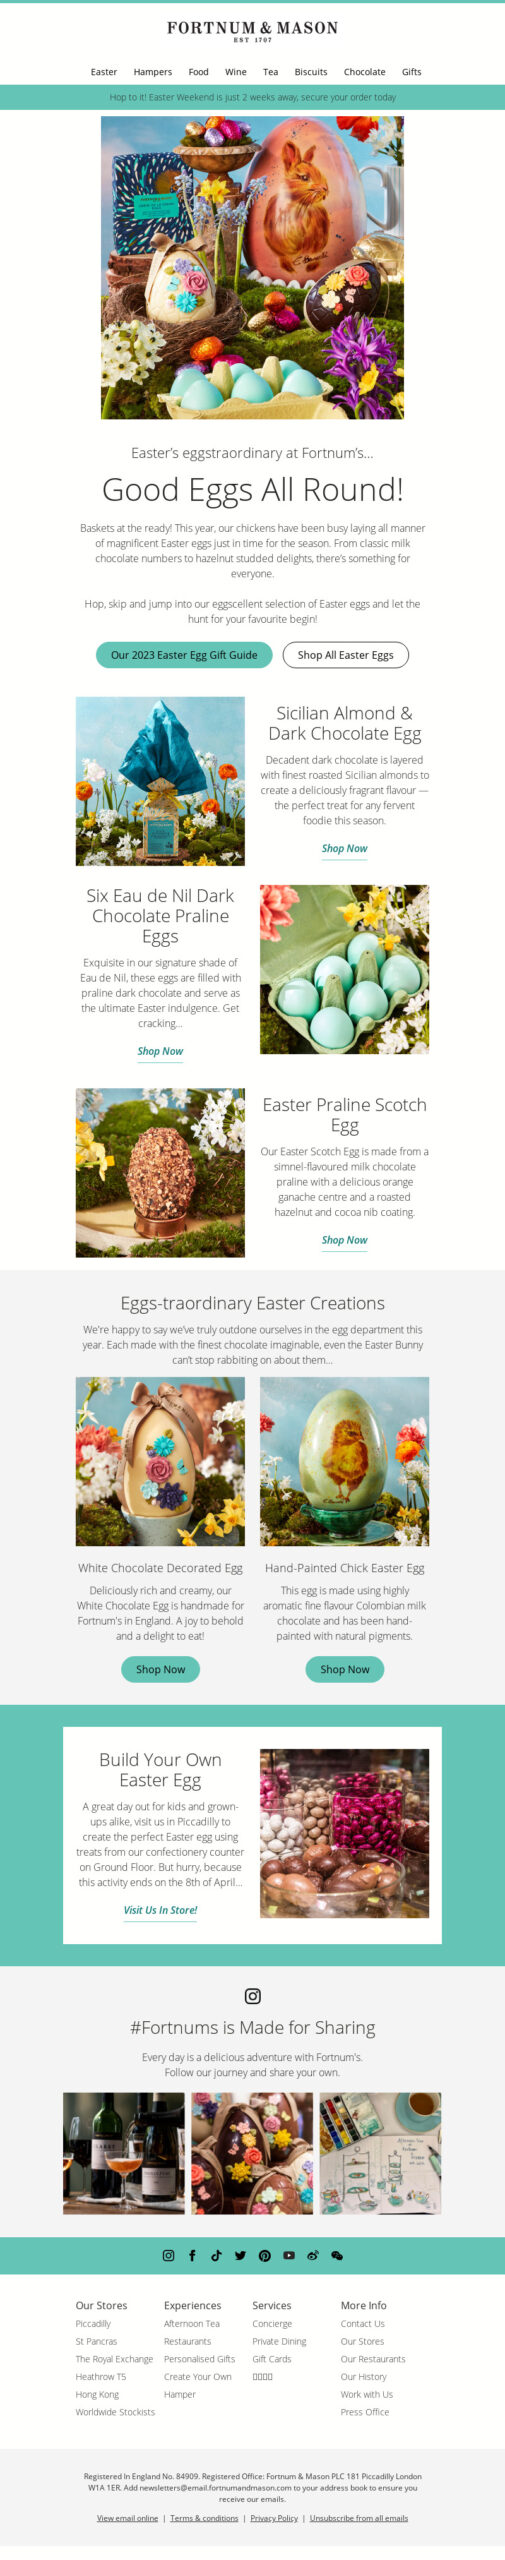 Fortnum and Mason's Easter email campaign showcasing an elegant Easter egg gift guide.